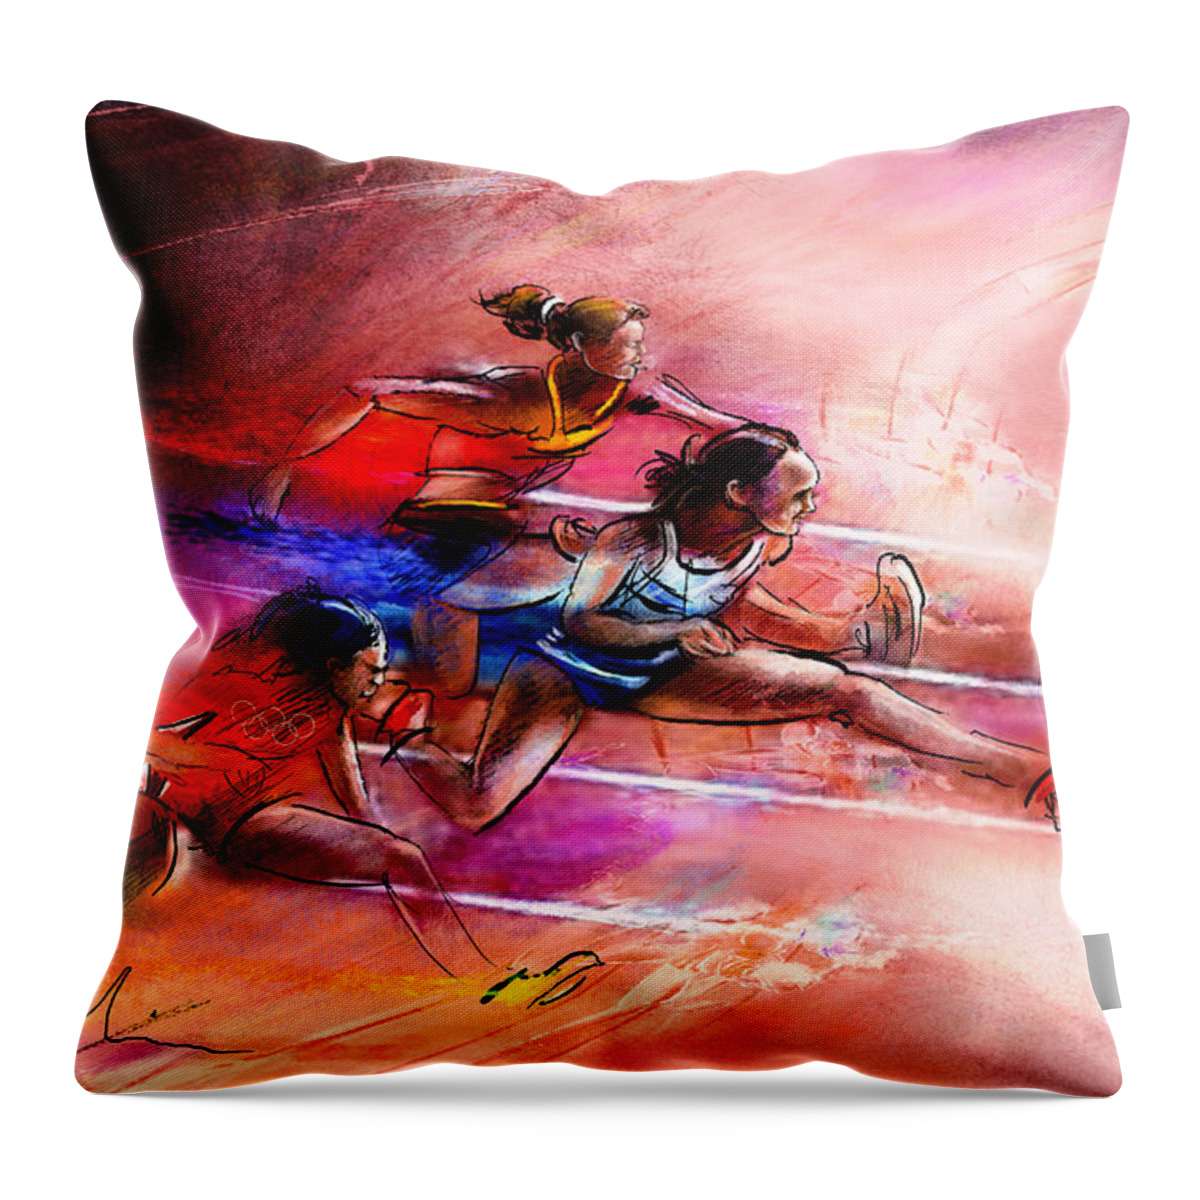 Sports Throw Pillow featuring the painting Olympics Heptathlon Hurdles 01 by Miki De Goodaboom